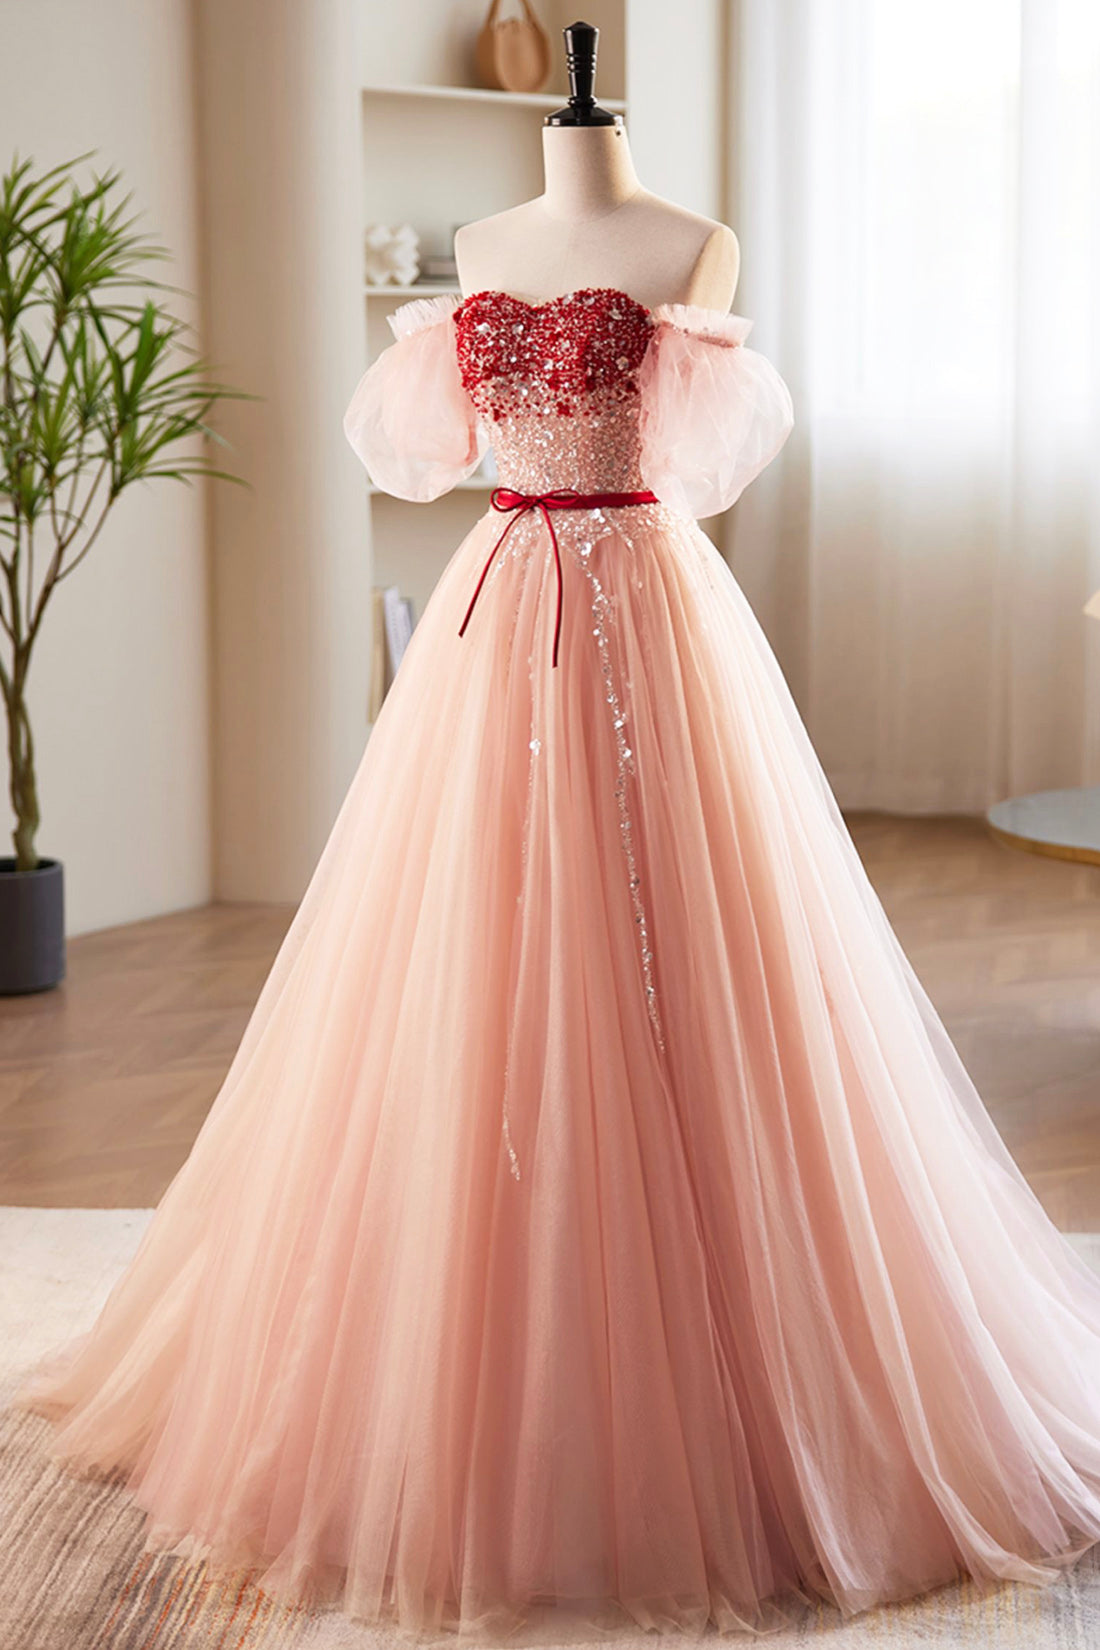 Pink Tulle Beaded Long Prom Dress, A-Line Off Shoulder Evening Party Dress